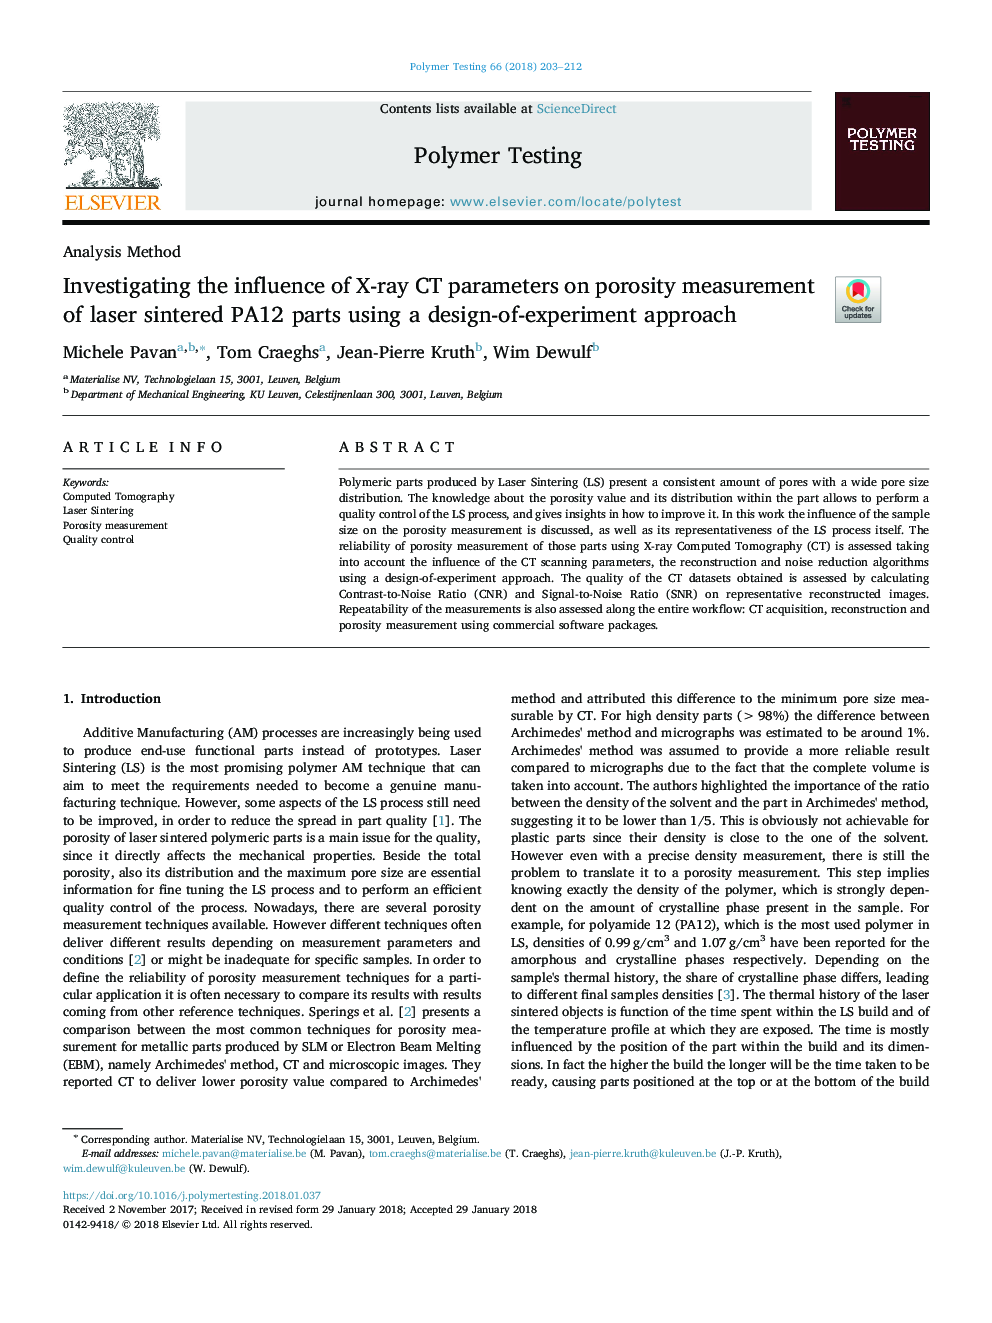 Investigating the influence of X-ray CT parameters on porosity measurement of laser sintered PA12 parts using a design-of-experiment approach